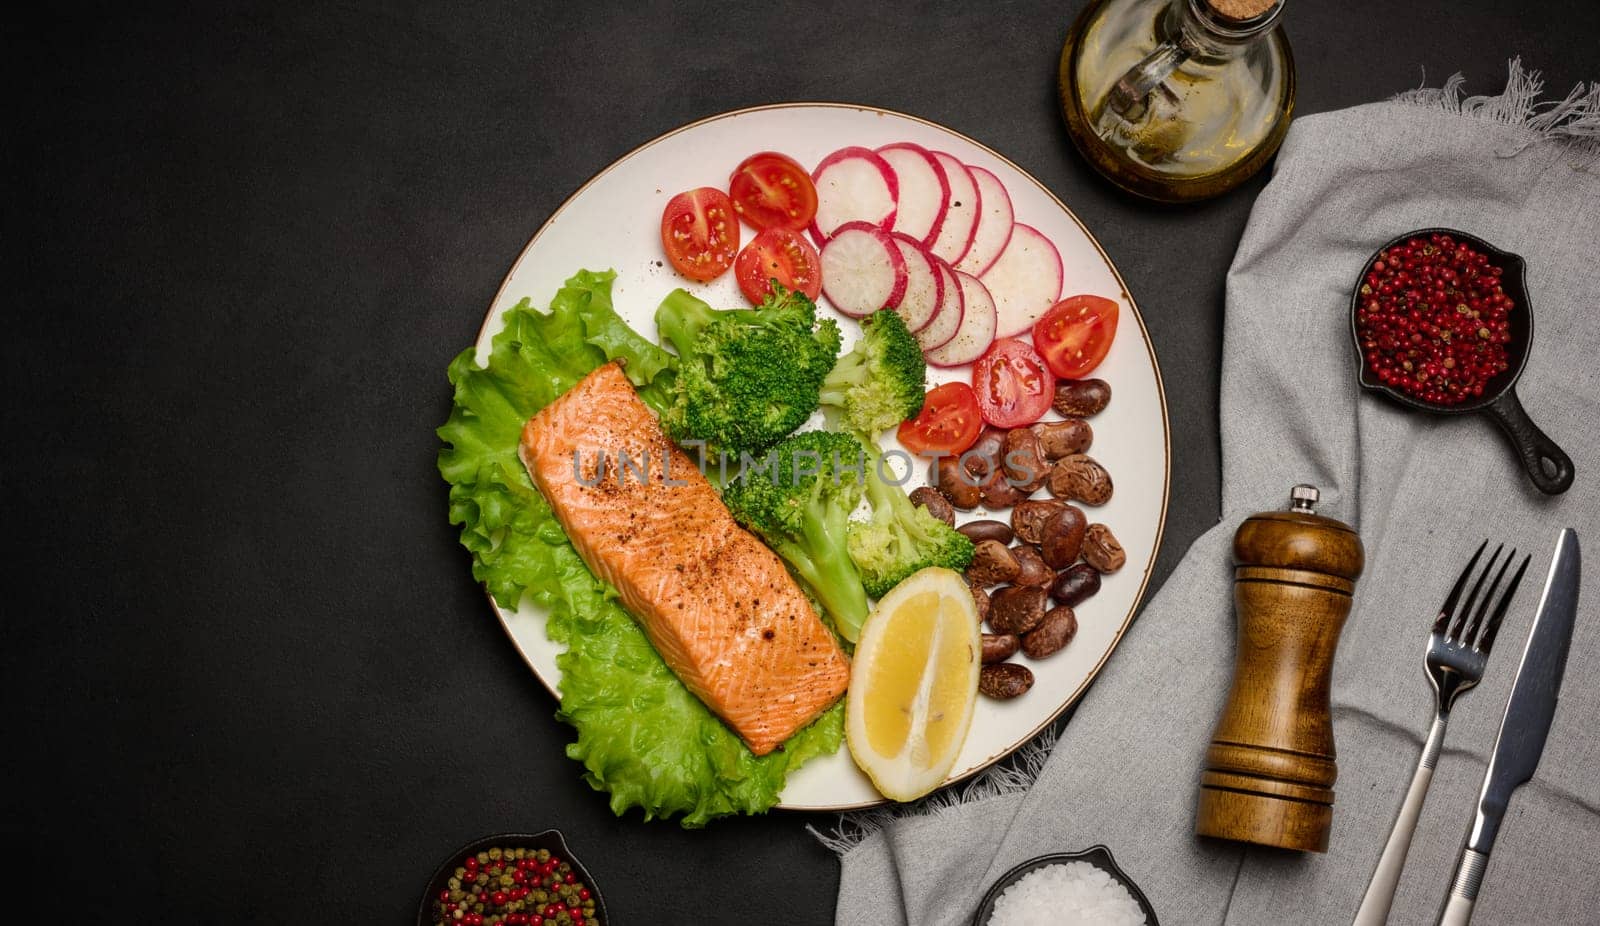 Healthy lunch with grilled salmon on green lettuce, next to vegetables, tomatoes, radishes, broccoli and a portion of beans.  by ndanko